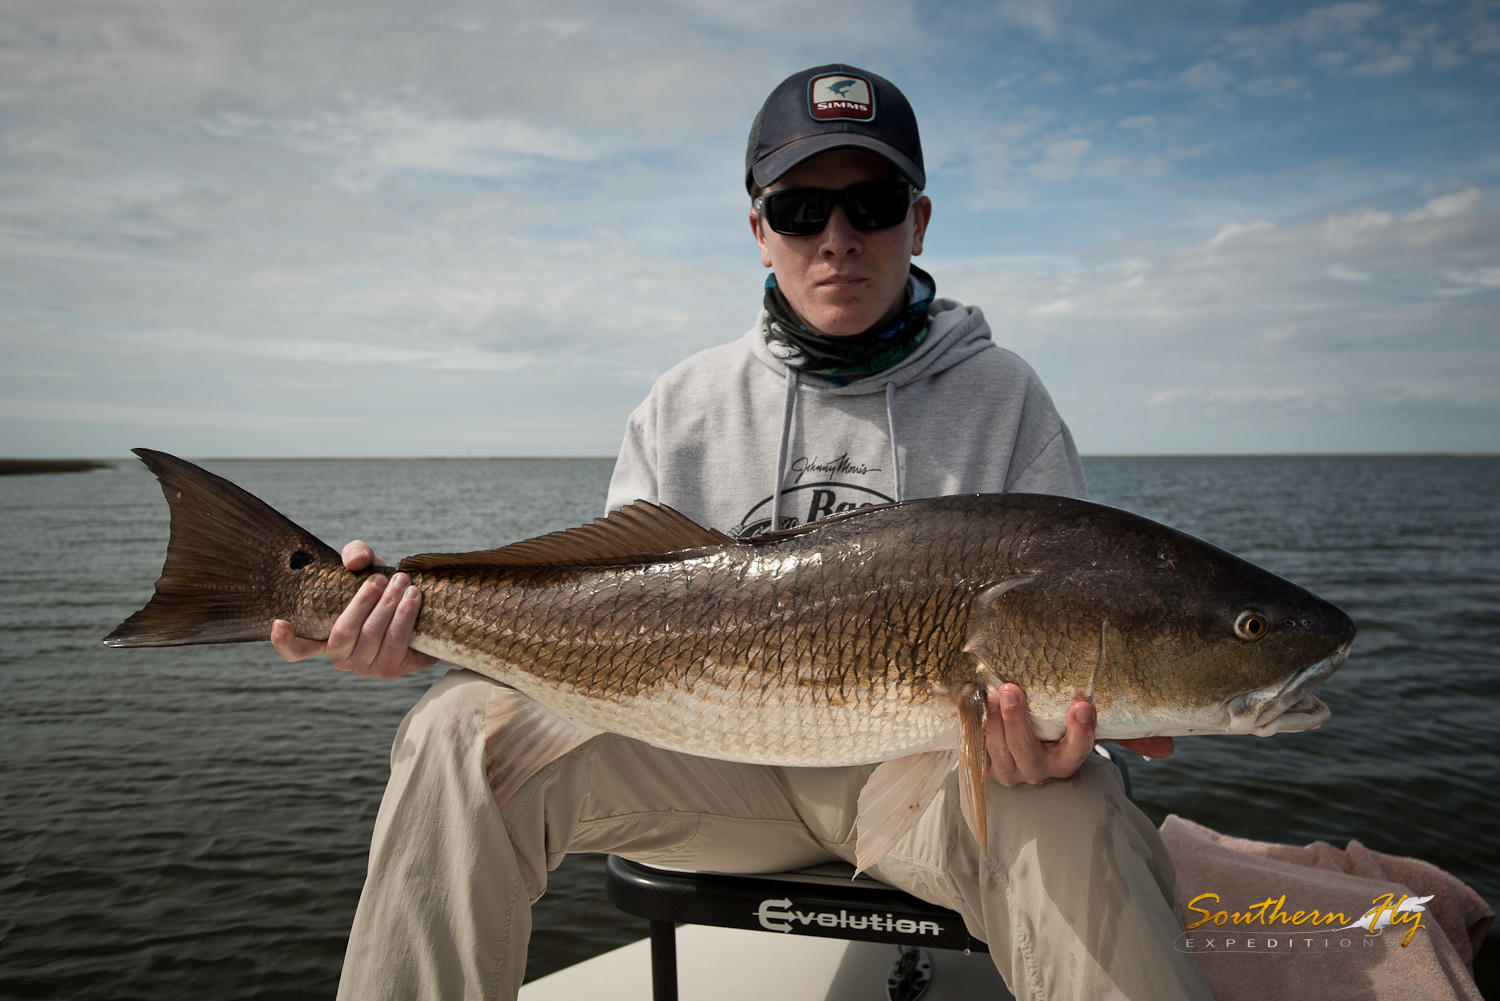 2019-03-08-09_SouthernFlyExpeditions_NewOrleans_TimFrank&Carson-2.jpg